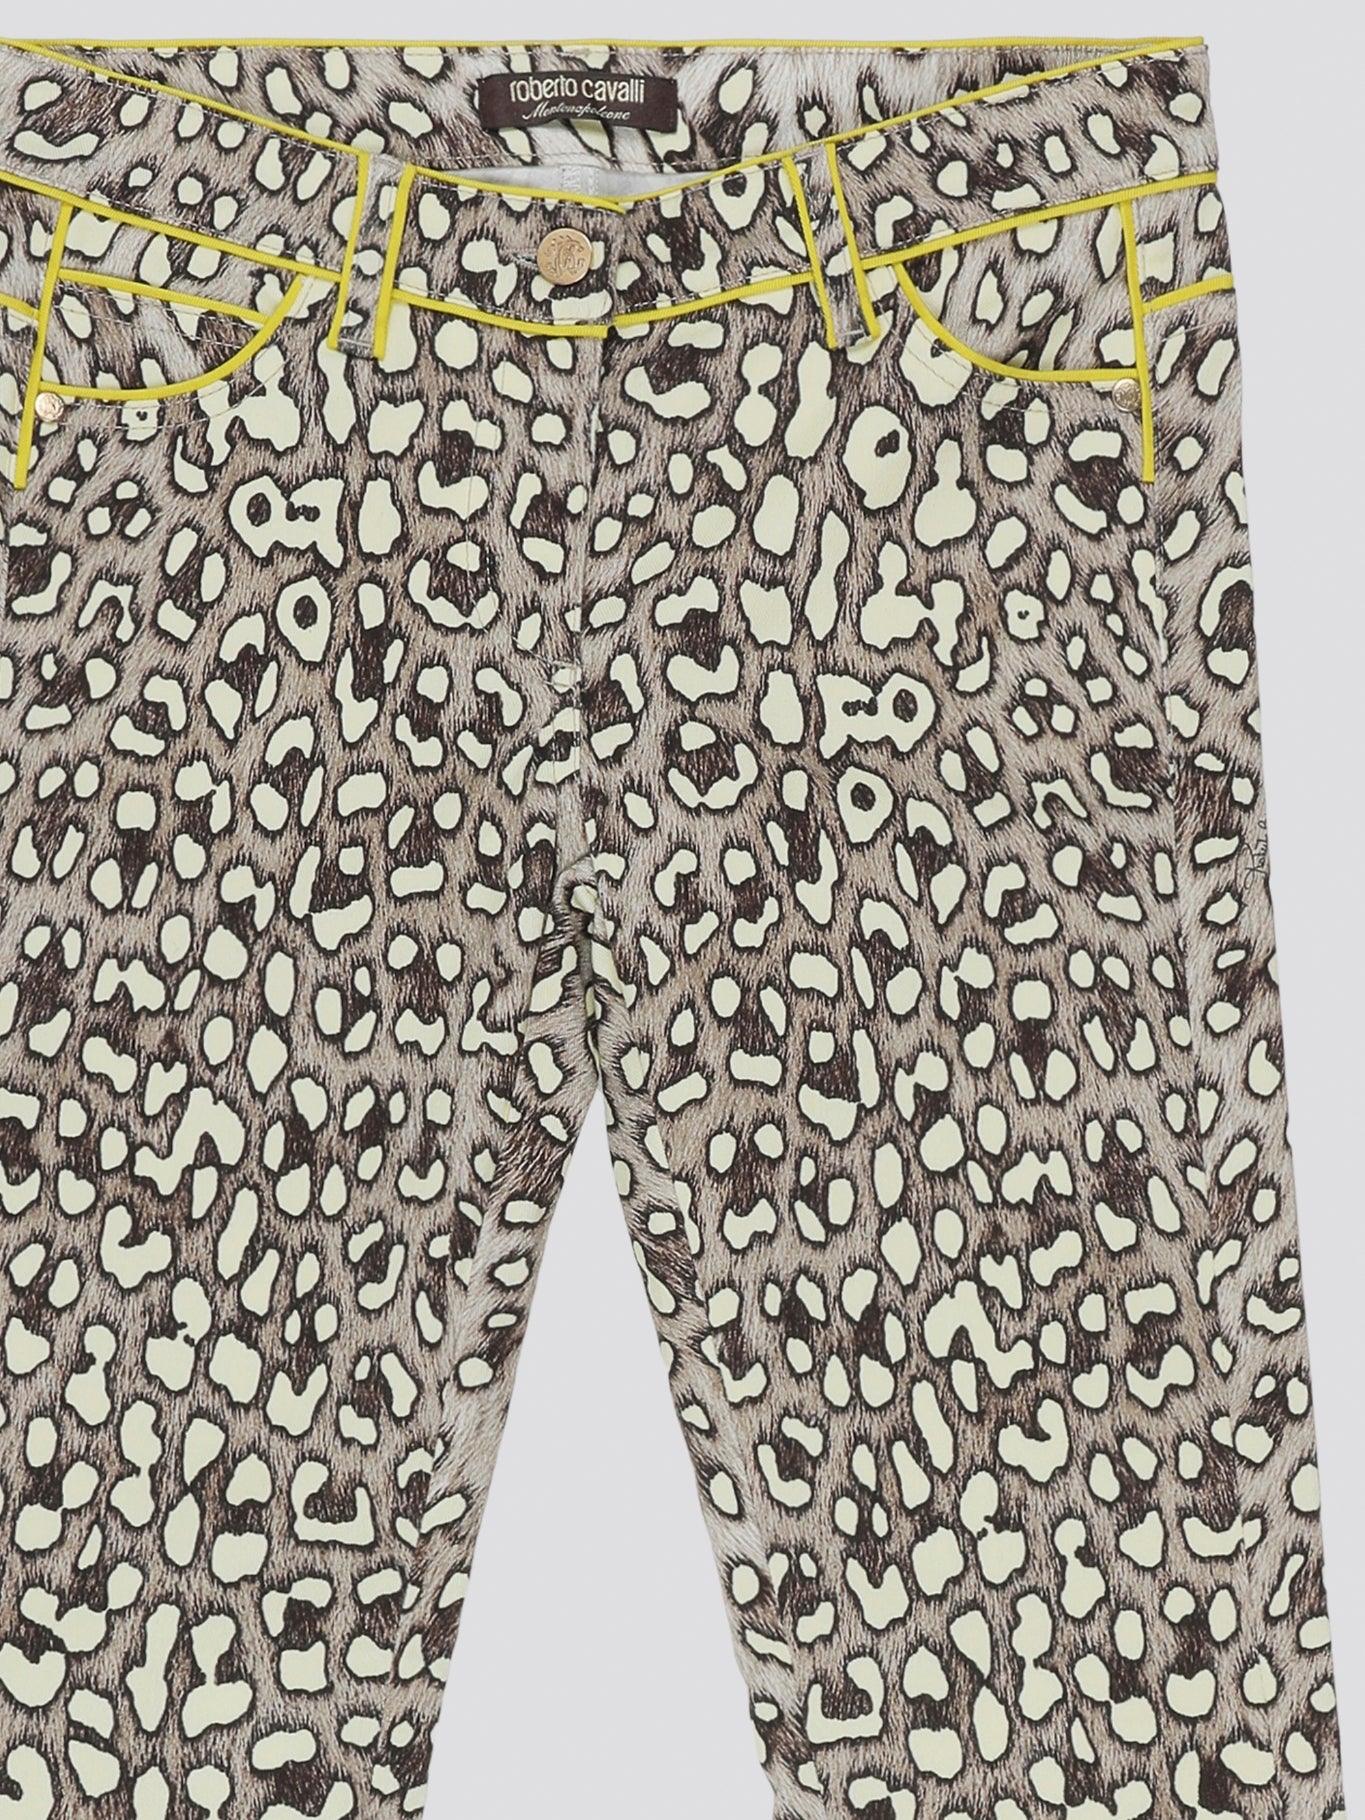 Step into fierce style with these Leopard Print Wide Leg Jeans by Roberto Cavalli. Embrace your wild side with the bold leopard print pattern that is sure to make a statement wherever you go. The wide leg silhouette adds a touch of elegance to these edgy jeans, perfect for a fashion-forward look.